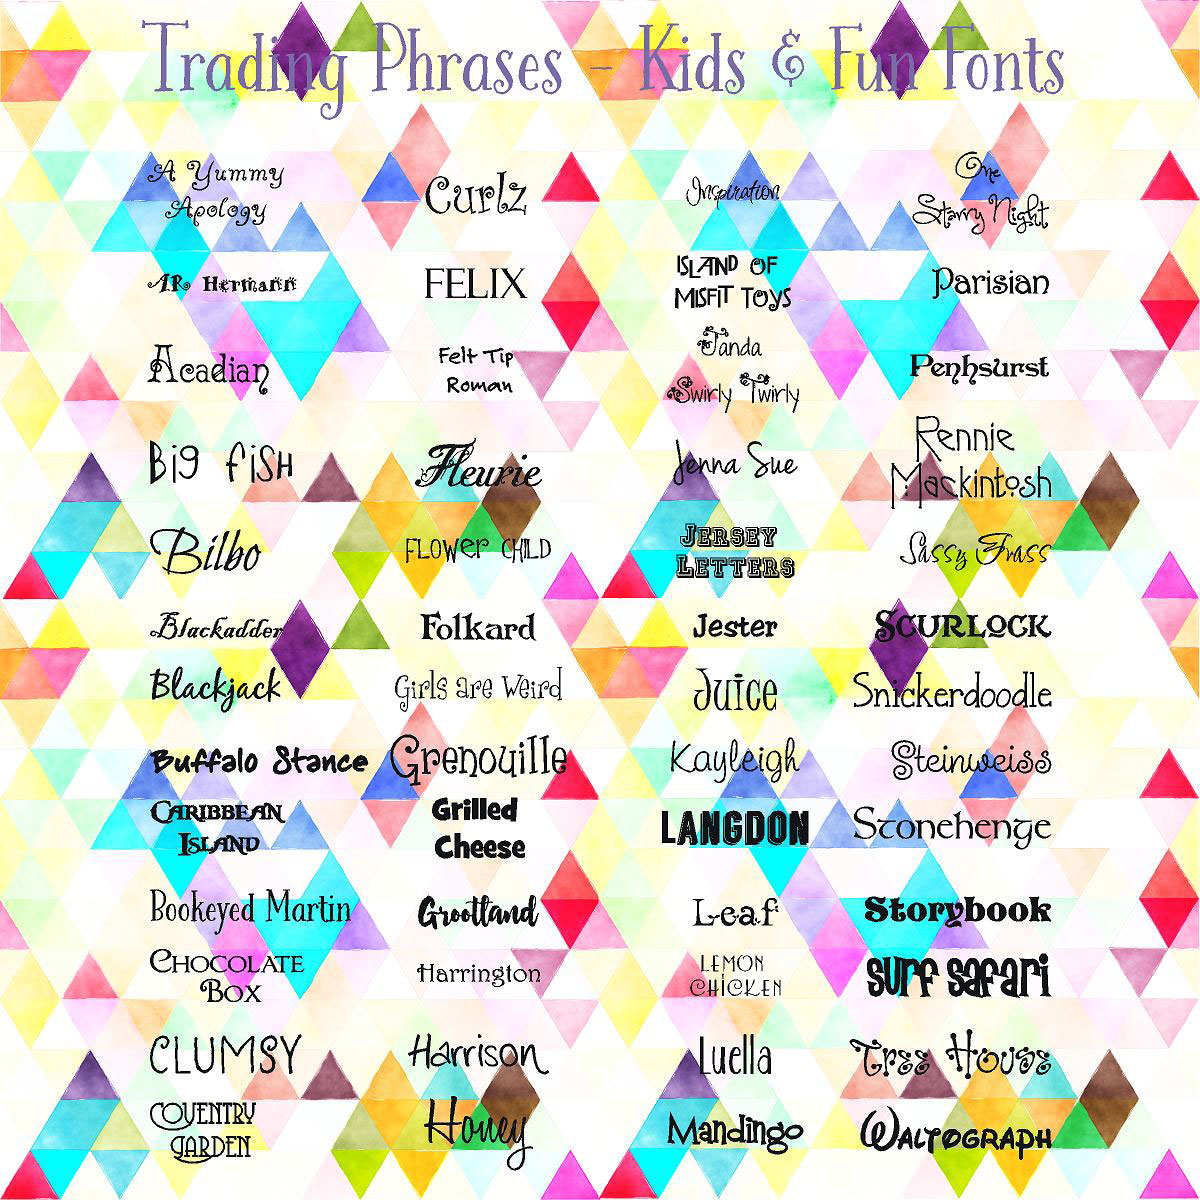 Trading Phrases Kids & Fun Fonts